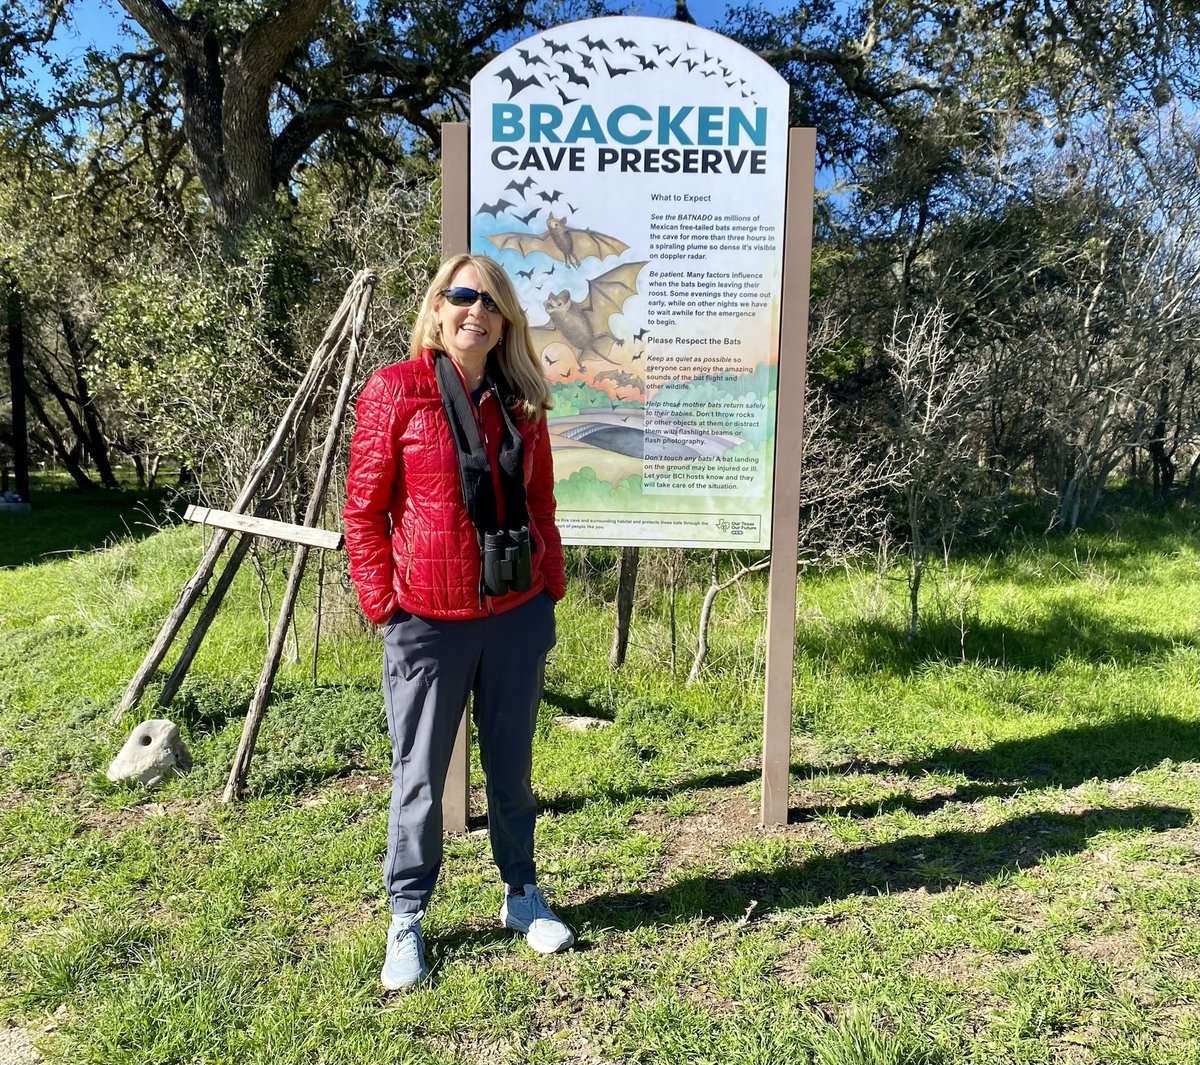 Thanks to our colleagues from the @nature_org leadership team for visiting some of our people and projects in Texas this week! We had a wonderful tour of Honey Creek and Bracken Bat Cave with @JenMorrisNature, @DiversityPage, @MegZGold and others. #oneconservancy